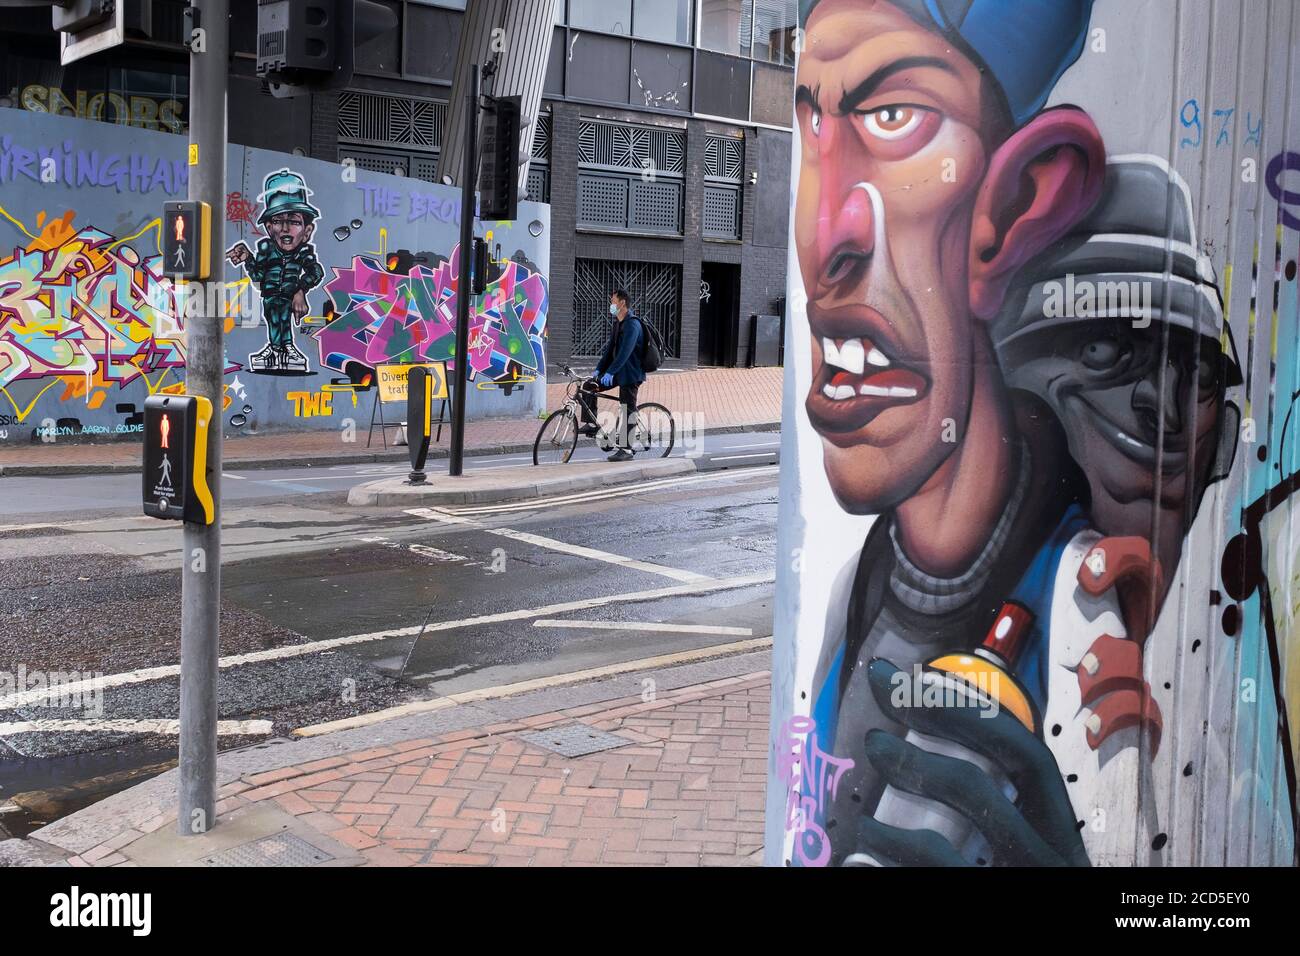 As numbers of Covid-19 cases in Birmingham have increased dramatically in recent weeks, and with the expectation that the city will be added to the watch list of critical areas which may face a local lockdown, people wearing face masks pass Birmingham street art graffiti in the city centre on 18th August 2020 in London, United Kingdom. With other areas in the Midlands under localised lockdown, people and businesses are being urged to follow the Coronavirus advice for workplace and family life help reduce the risk. Stock Photo